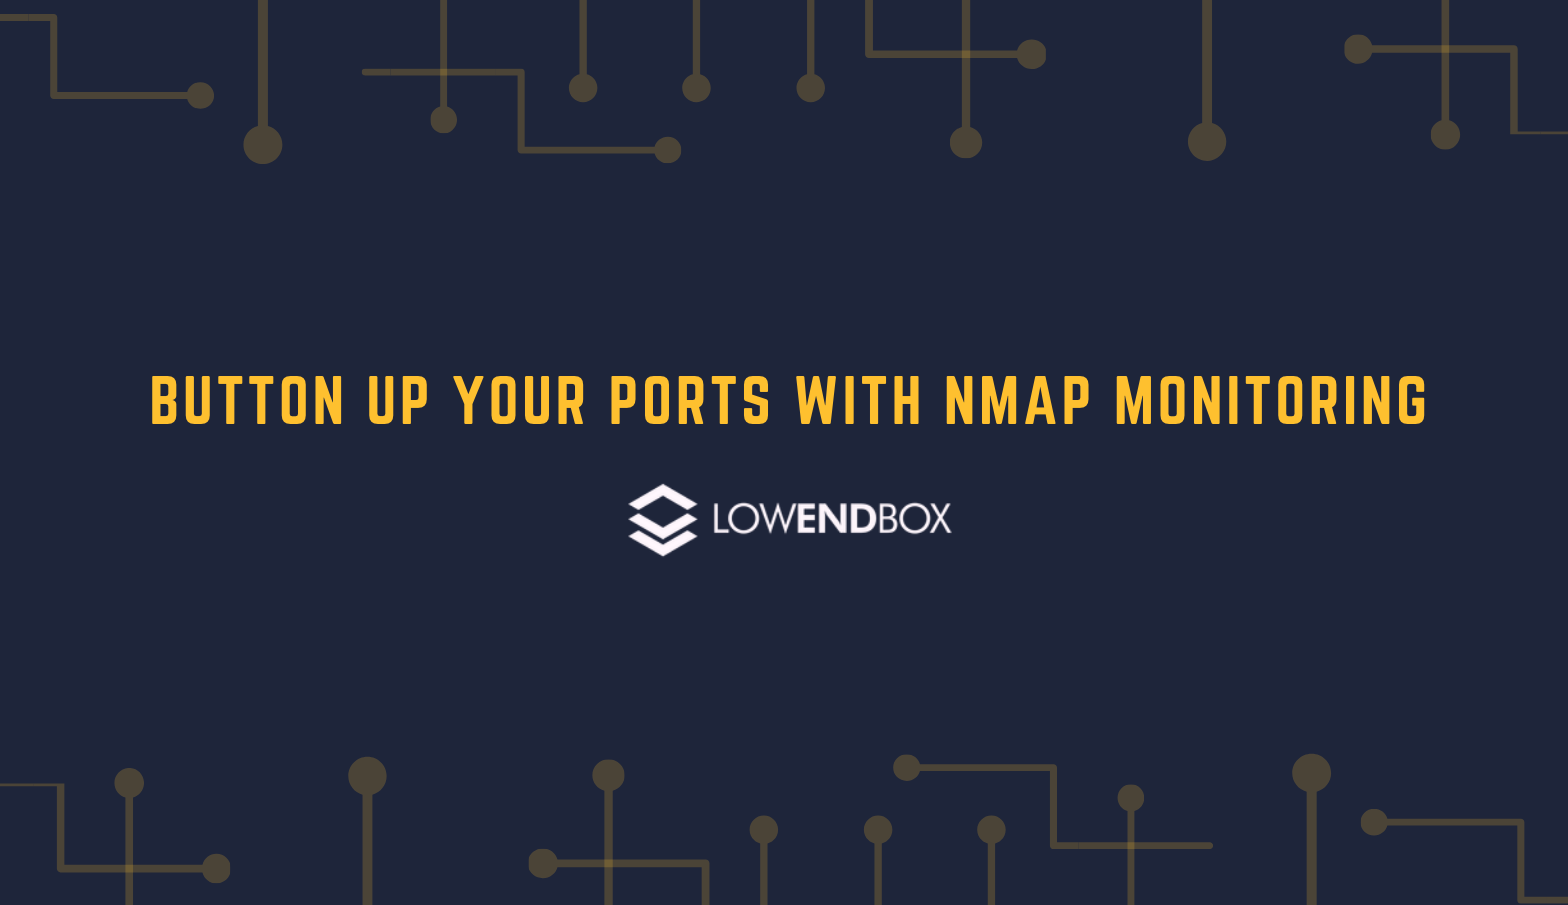 Improved Server Security By Closing Ports With nmap Monitoring